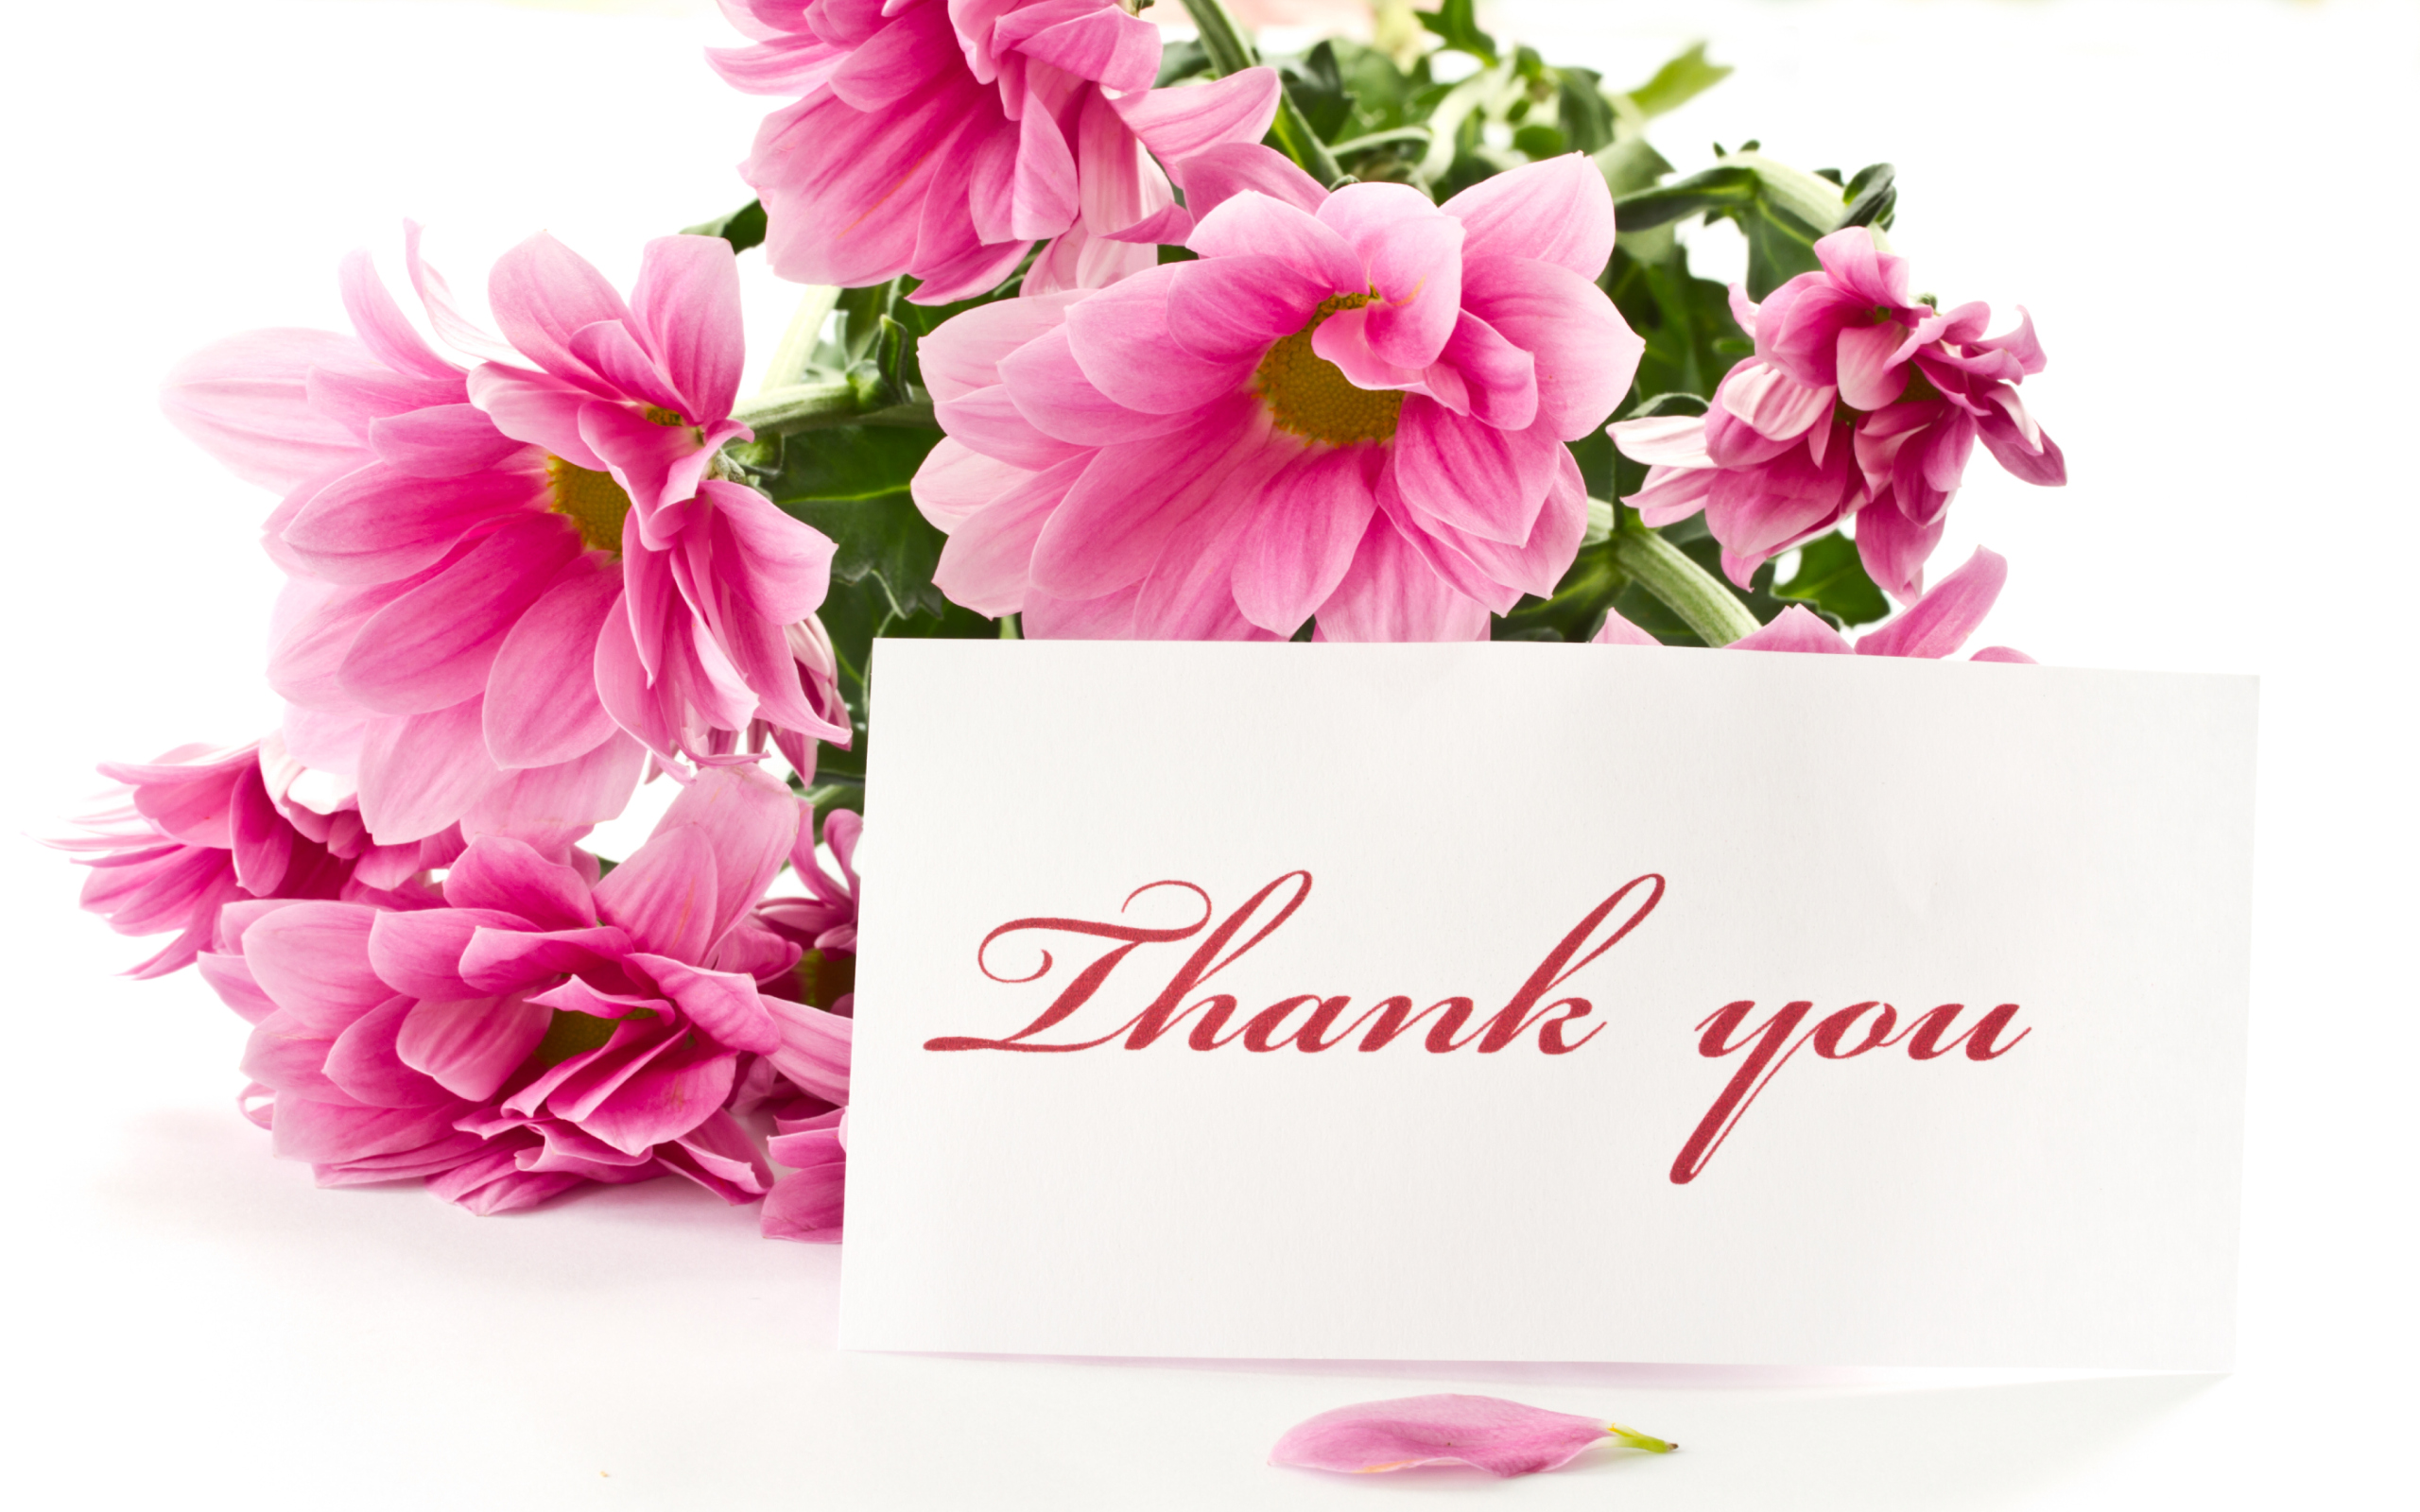 Thank You friends free hd picture | Latest HD Wallpapers